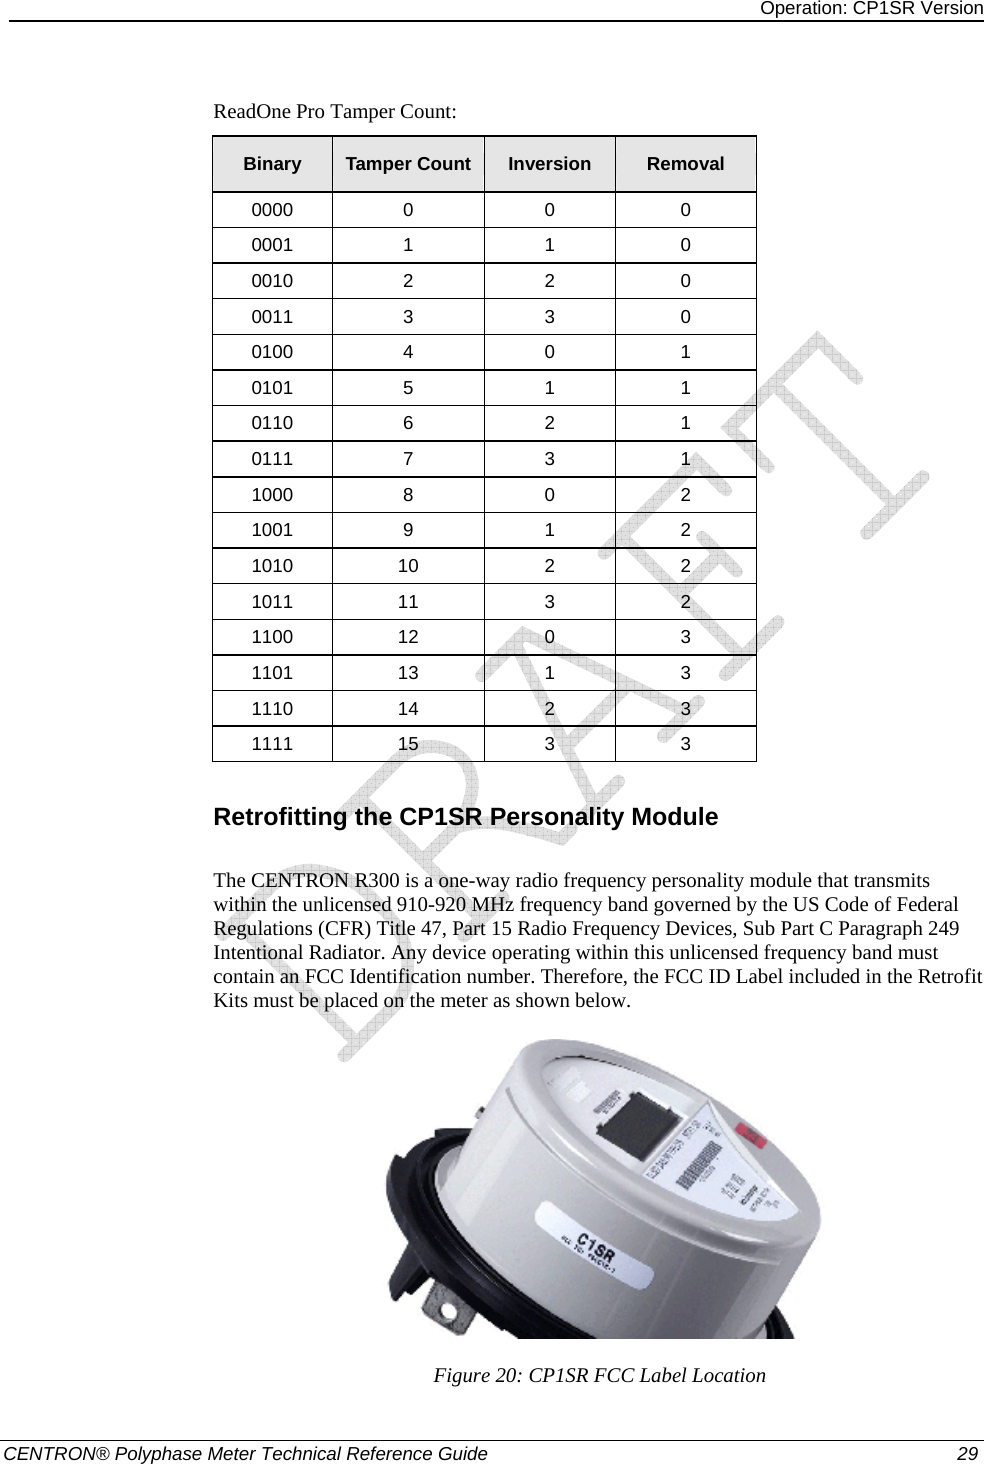 Operation: CP1SR Version   CENTRON® Polyphase Meter Technical Reference Guide  29 ReadOne Pro Tamper Count: Binary  Tamper Count  Inversion  Removal 0000 0  0  0 0001 1  1  0 0010 2  2  0 0011 3  3  0 0100 4  0  1 0101 5  1  1 0110 6  2  1 0111 7  3  1 1000 8  0  2 1001 9  1  2 1010 10  2  2 1011 11  3  2 1100 12  0  3 1101 13  1  3 1110 14  2  3 1111 15  3  3  Retrofitting the CP1SR Personality Module The CENTRON R300 is a one-way radio frequency personality module that transmits within the unlicensed 910-920 MHz frequency band governed by the US Code of Federal Regulations (CFR) Title 47, Part 15 Radio Frequency Devices, Sub Part C Paragraph 249 Intentional Radiator. Any device operating within this unlicensed frequency band must contain an FCC Identification number. Therefore, the FCC ID Label included in the Retrofit Kits must be placed on the meter as shown below.   Figure 20: CP1SR FCC Label Location 